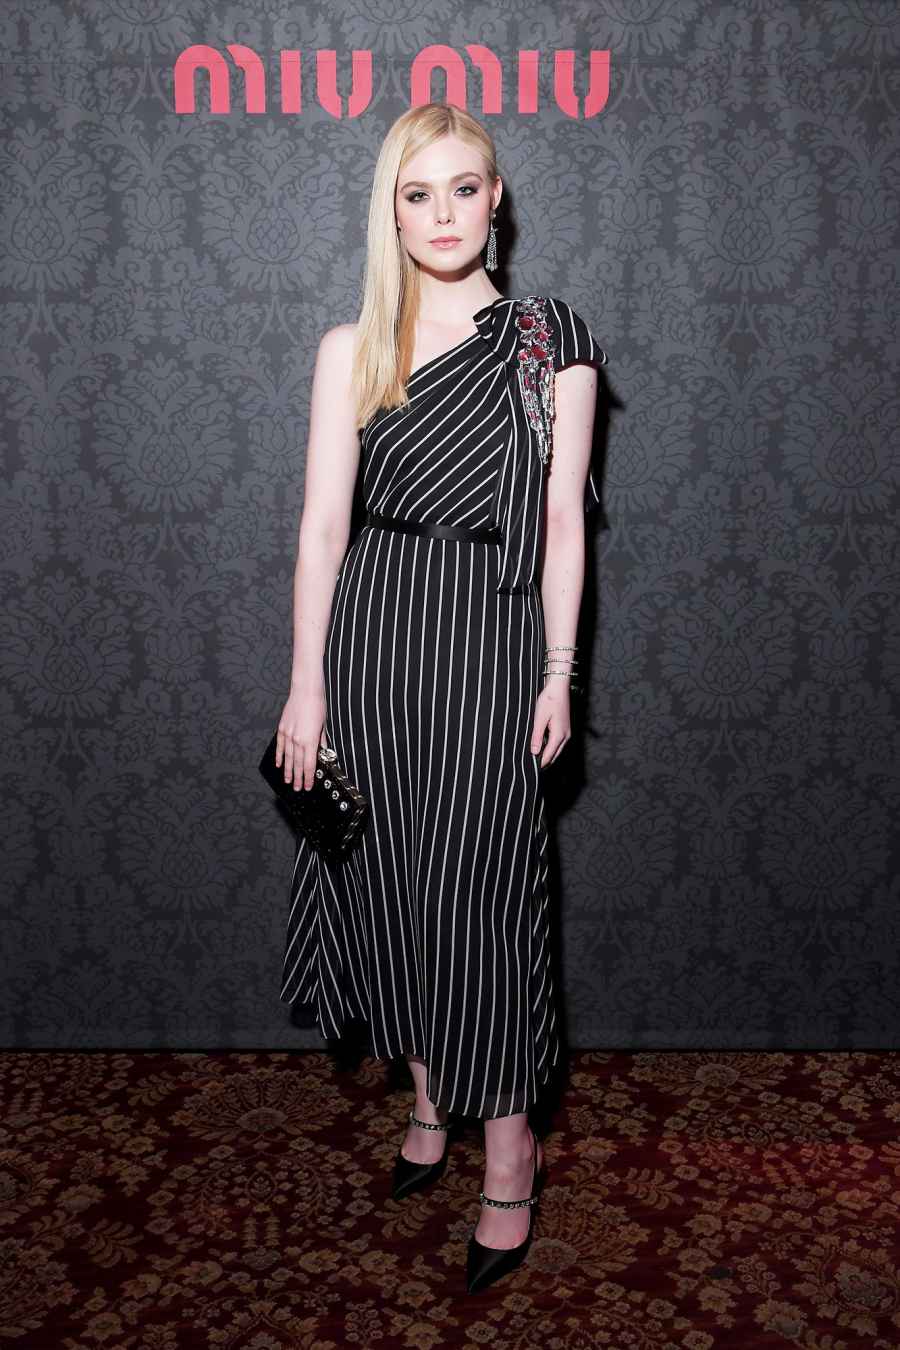 Elle Fanning Stars Closed Out Paris Fashion Week on a Sartorial High Note